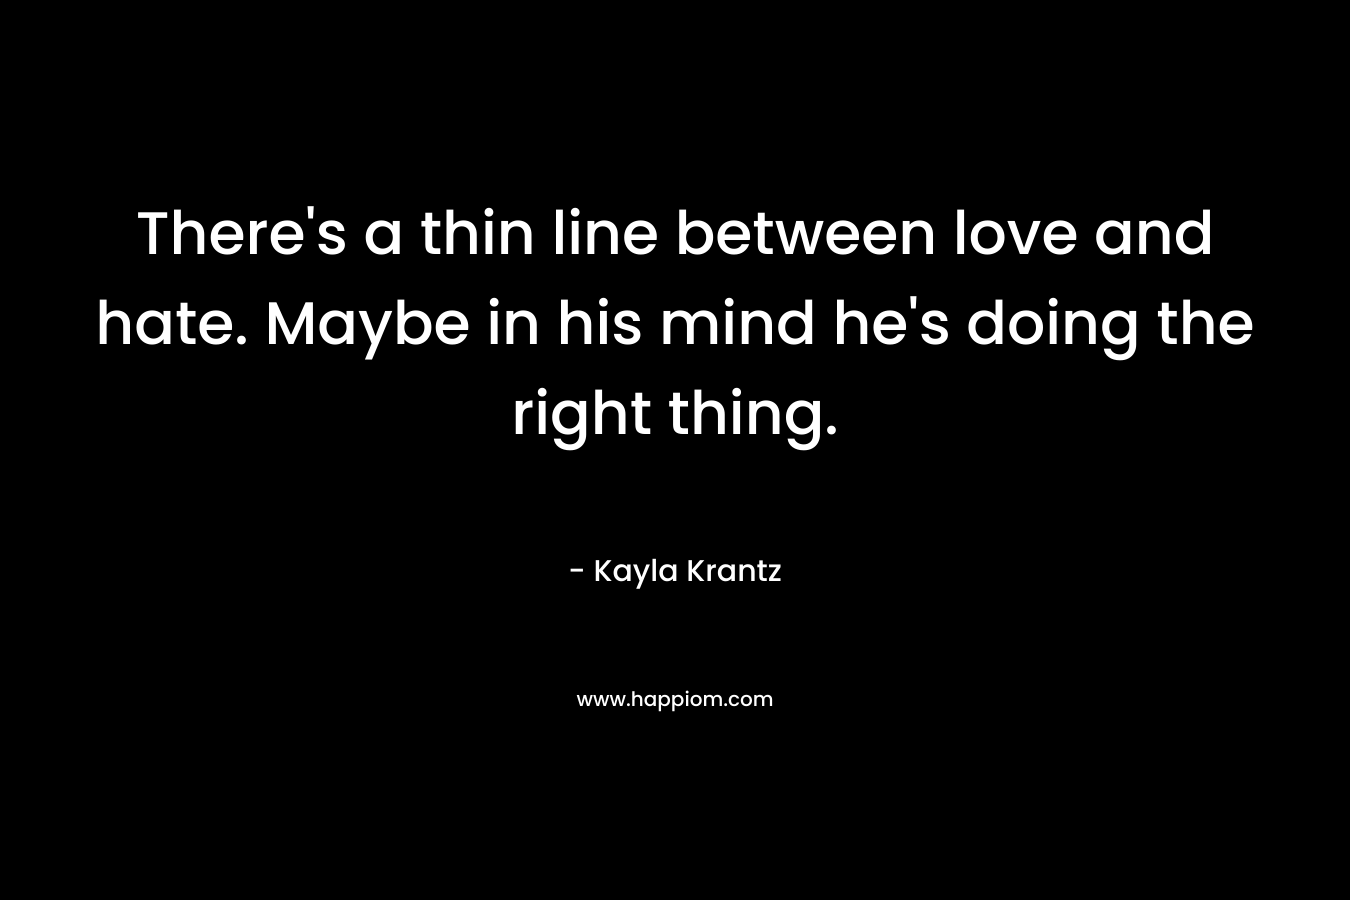 There's a thin line between love and hate. Maybe in his mind he's doing the right thing.